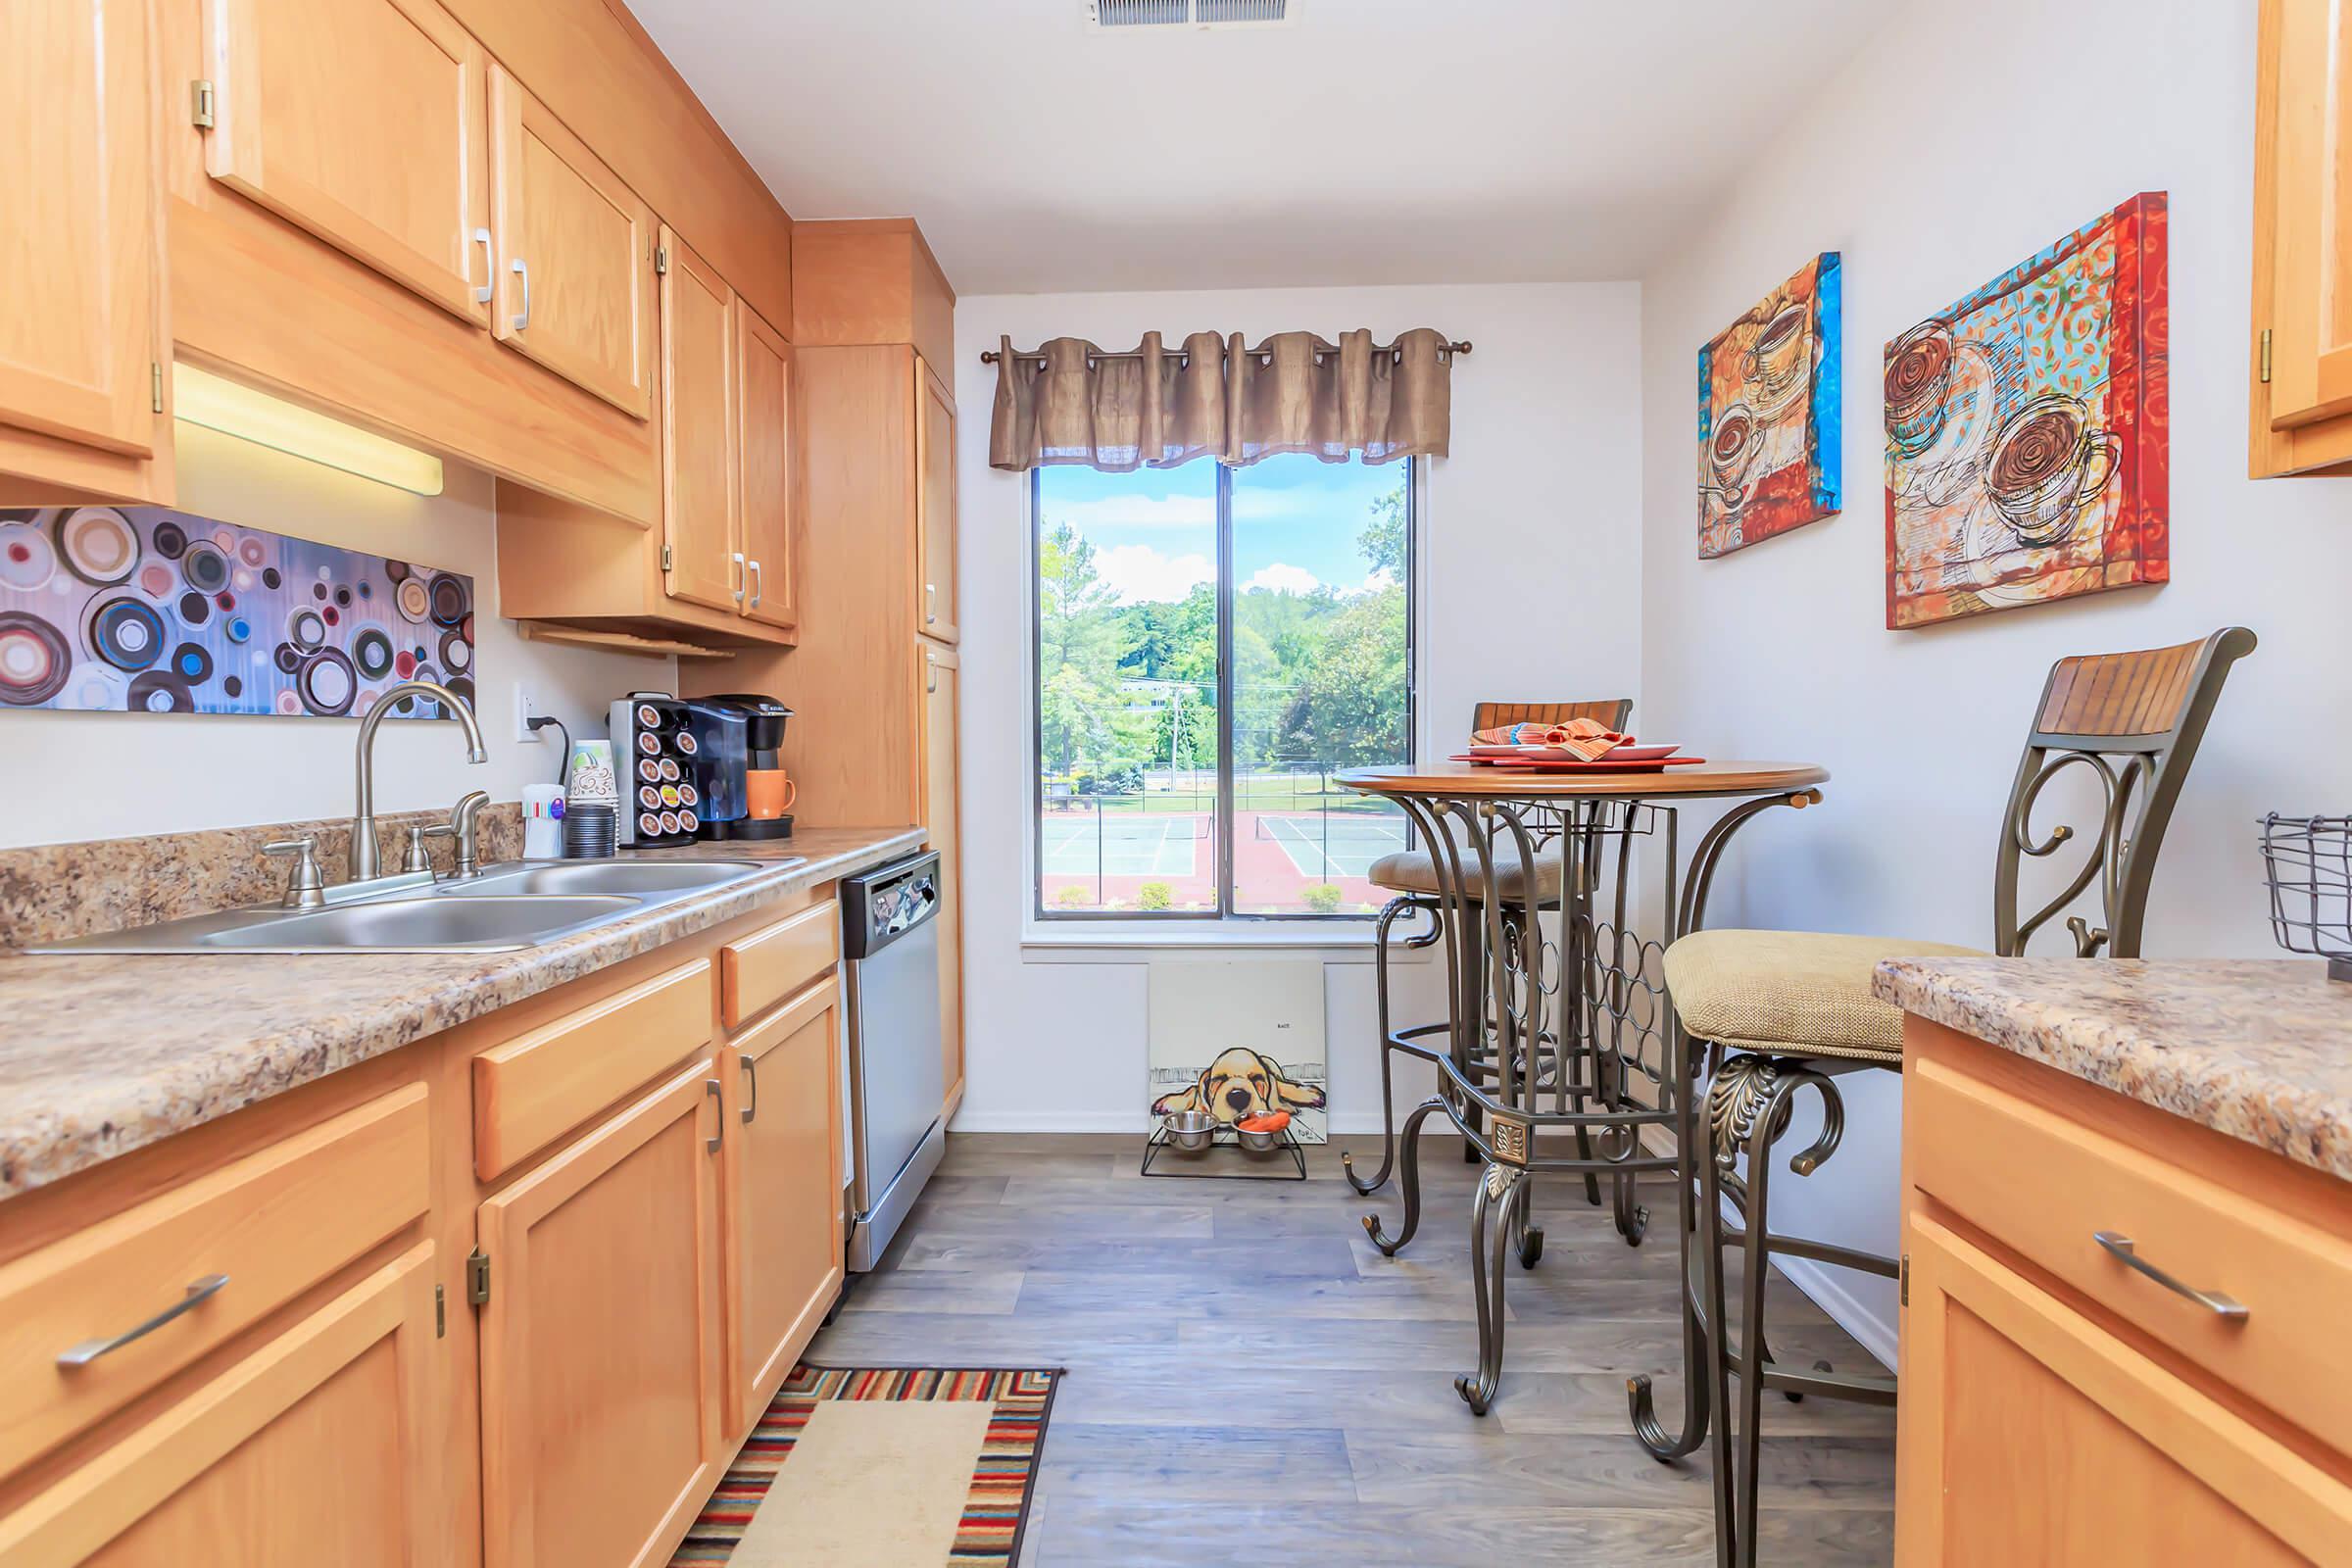 ENJOY THE COOK-FRIENDLY KITCHEN WITH FULL-SIZE WINDOW